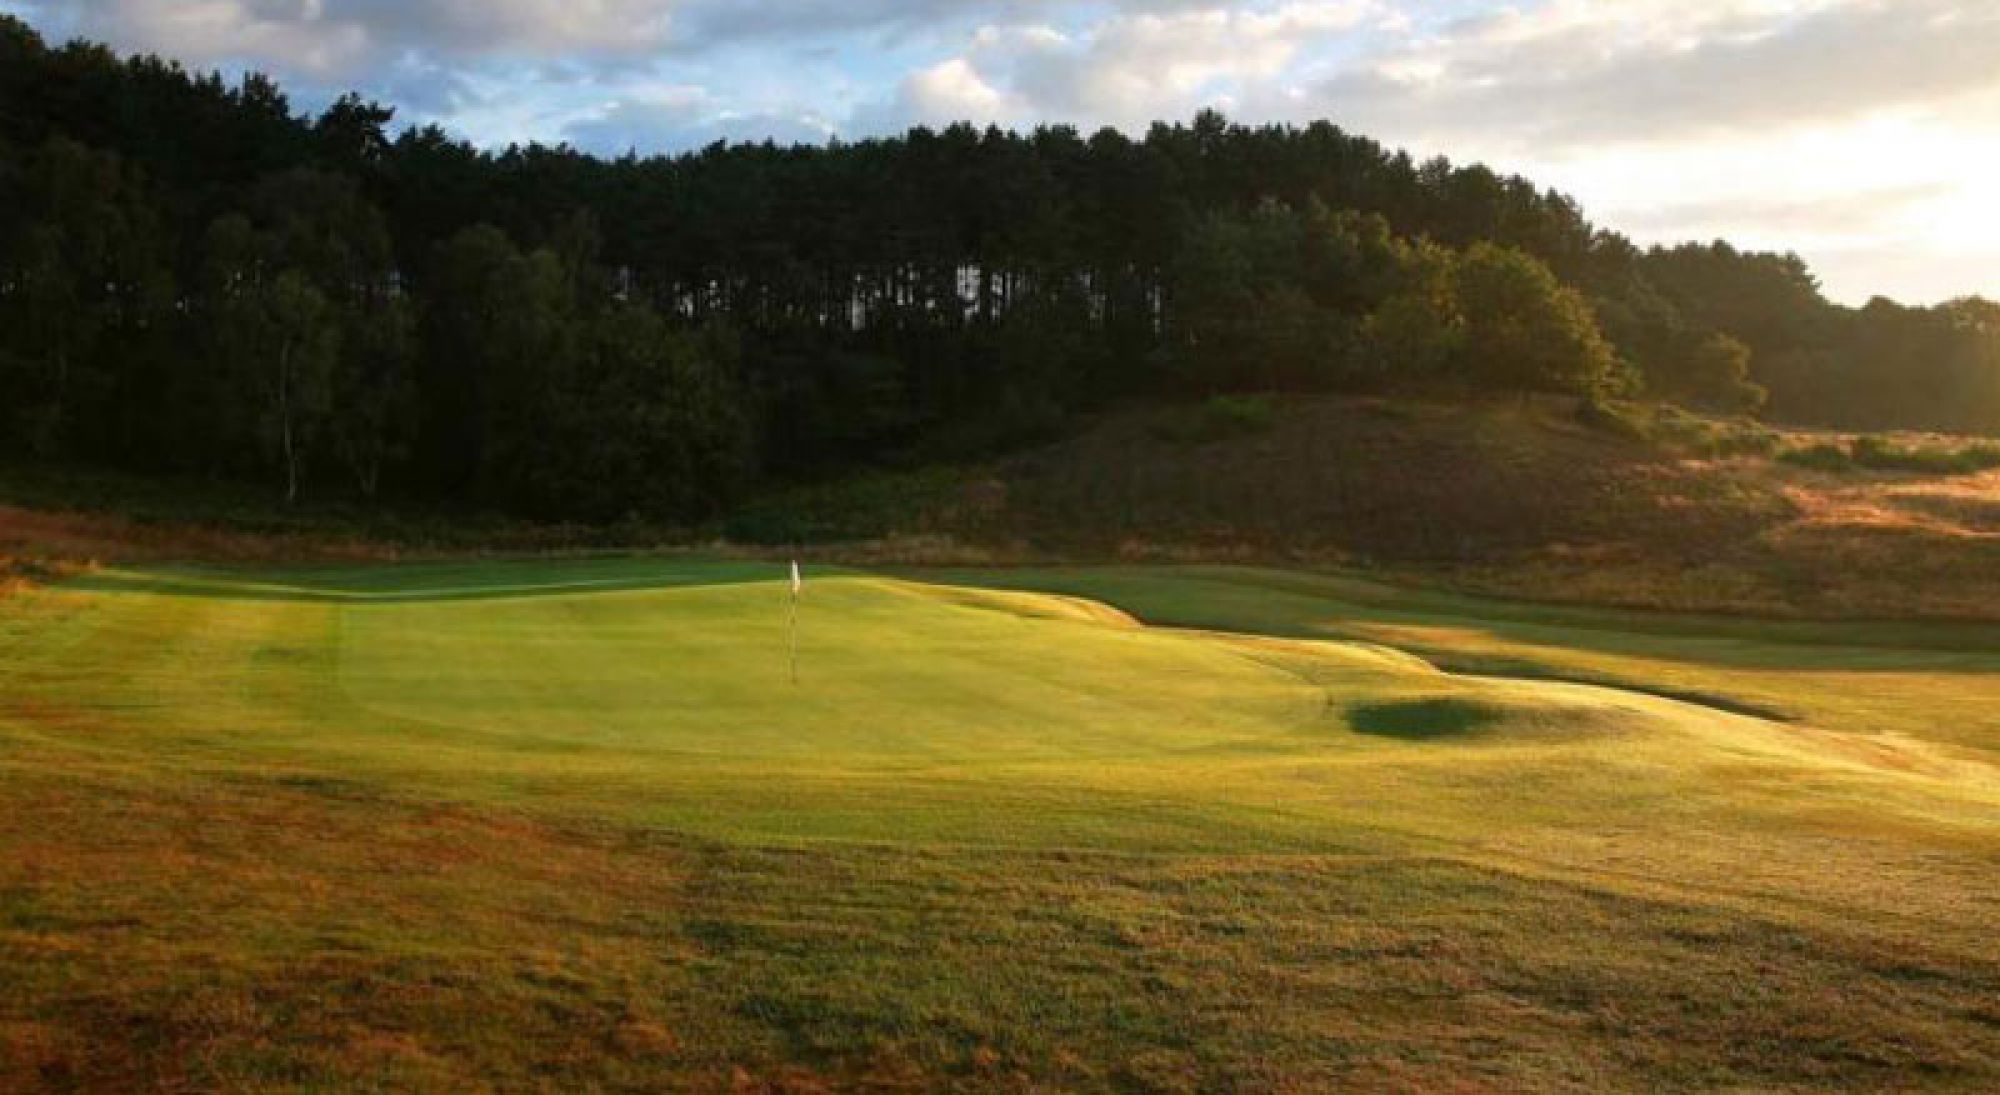 Notts Golf Club consists of among the best golf course in Nottinghamshire